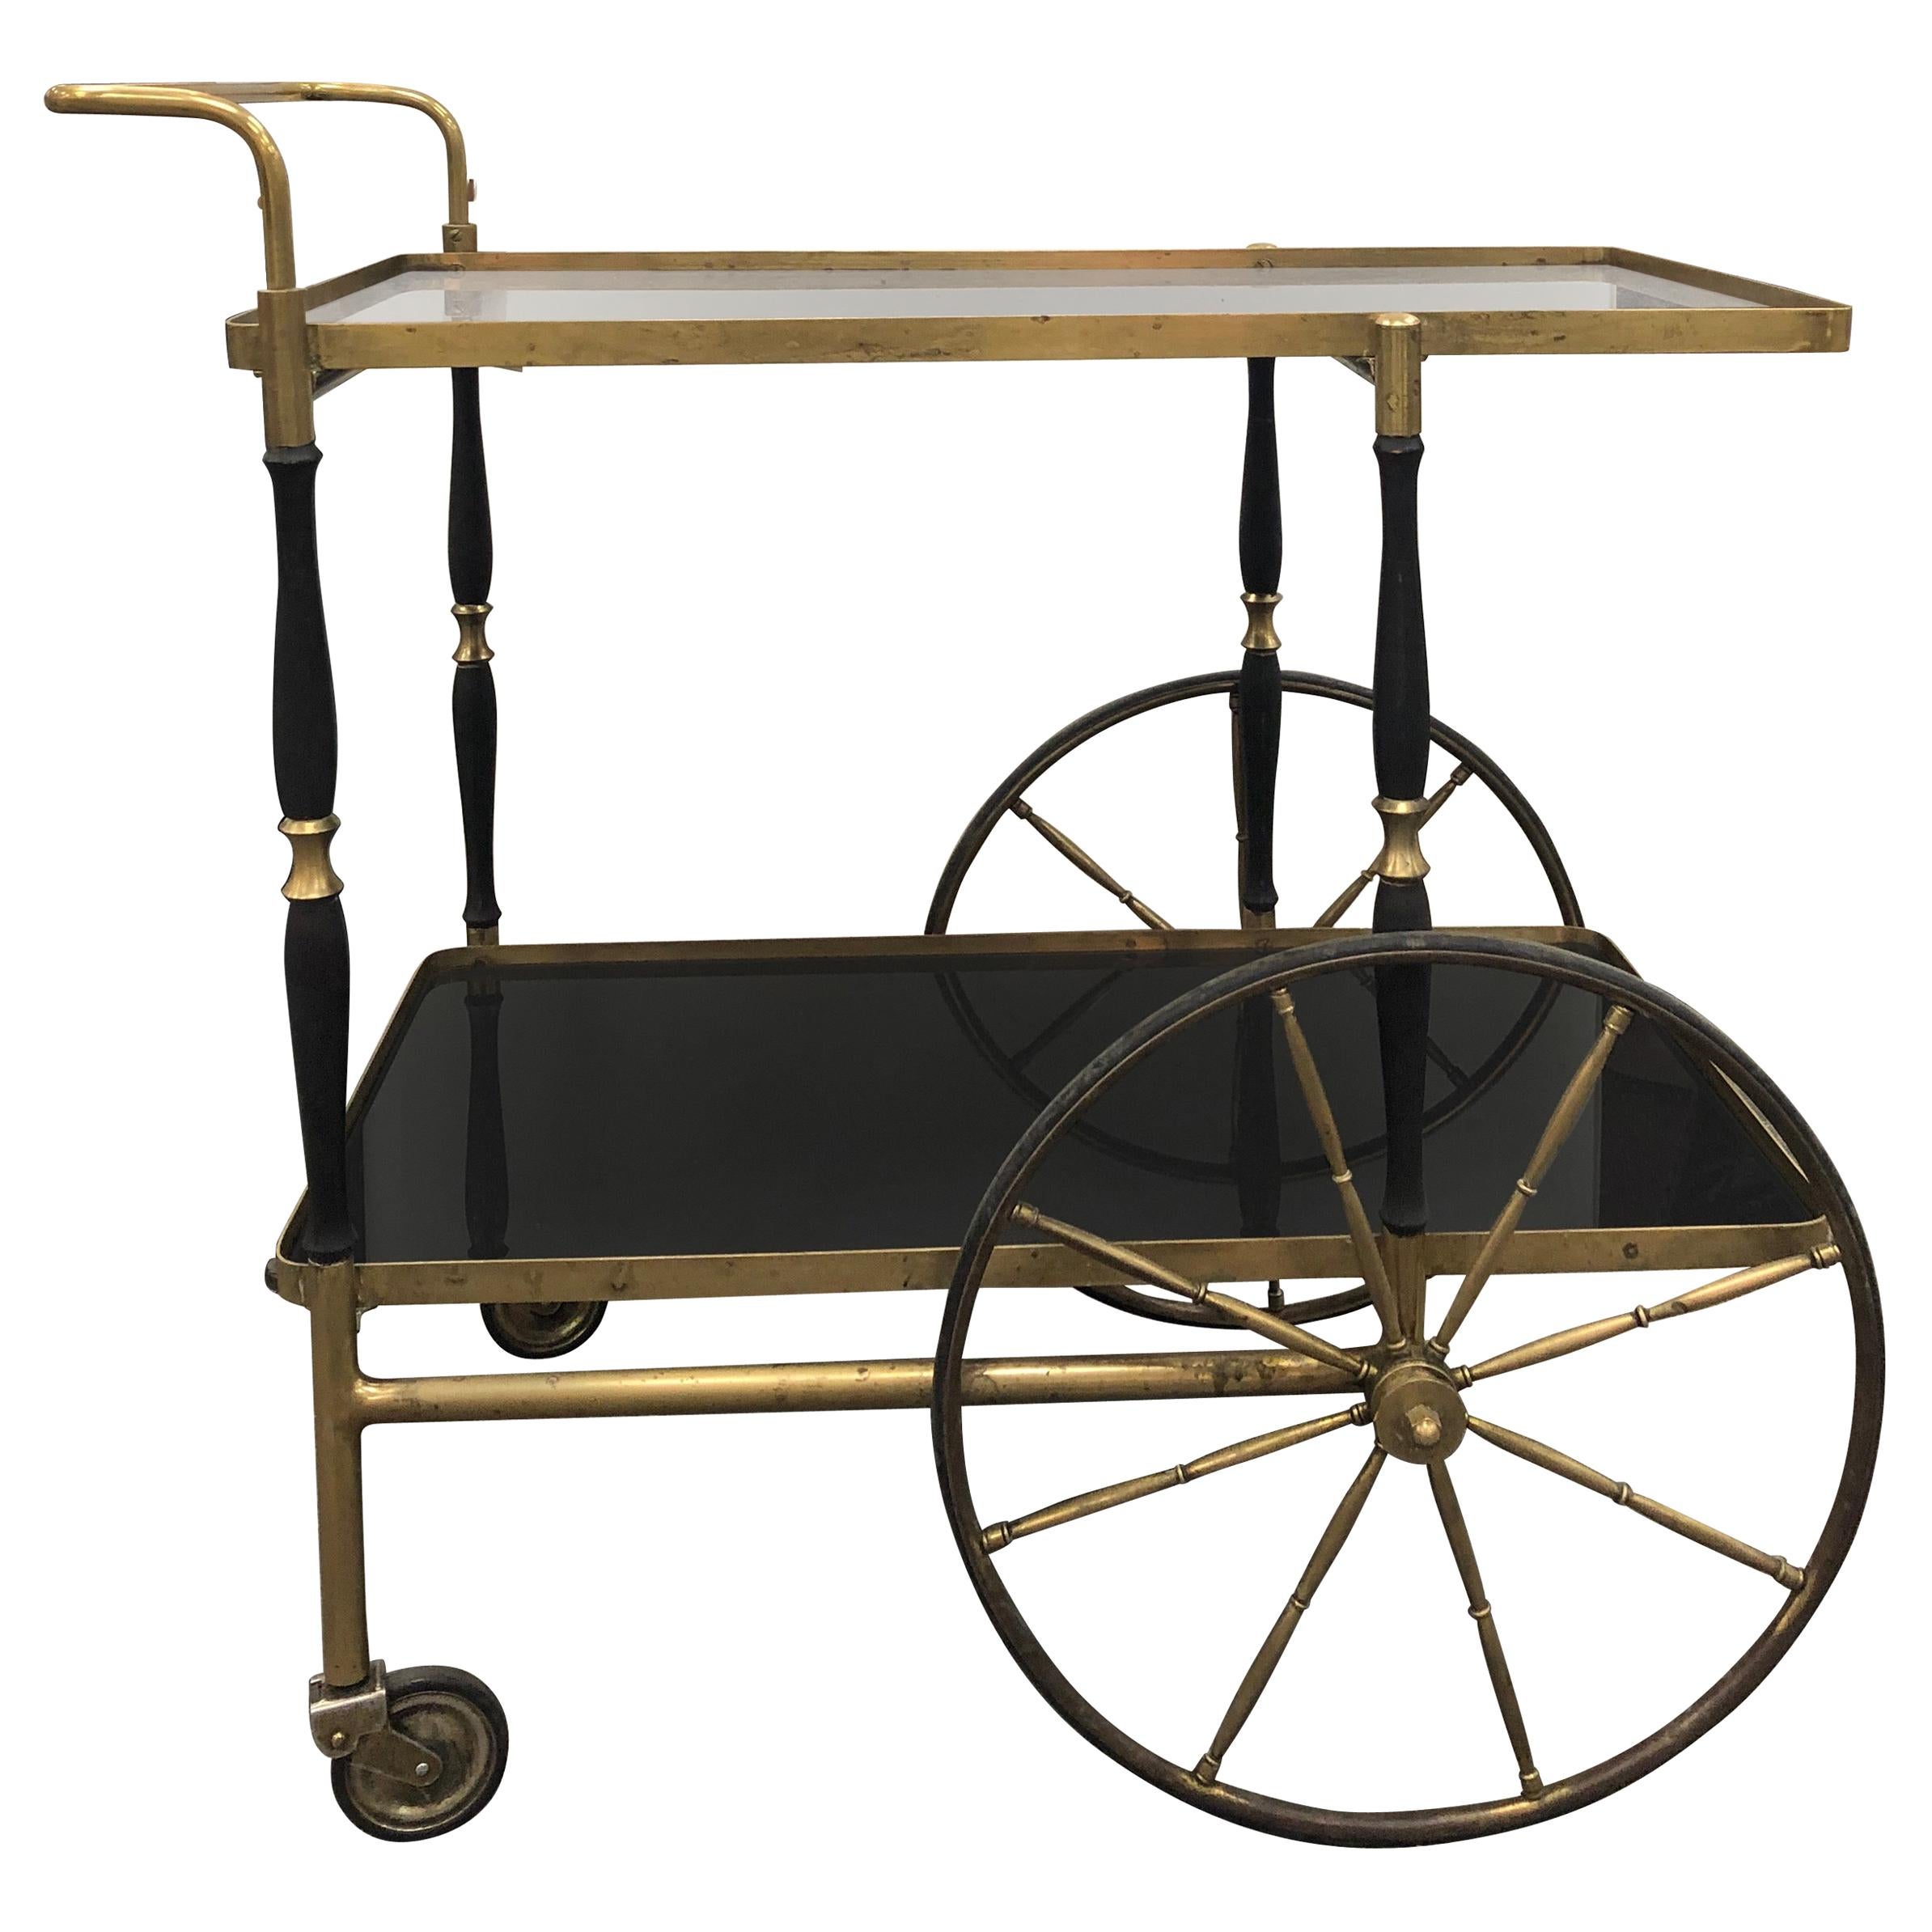 Midcentury Italian Brass Bar Cart by Morex For Sale